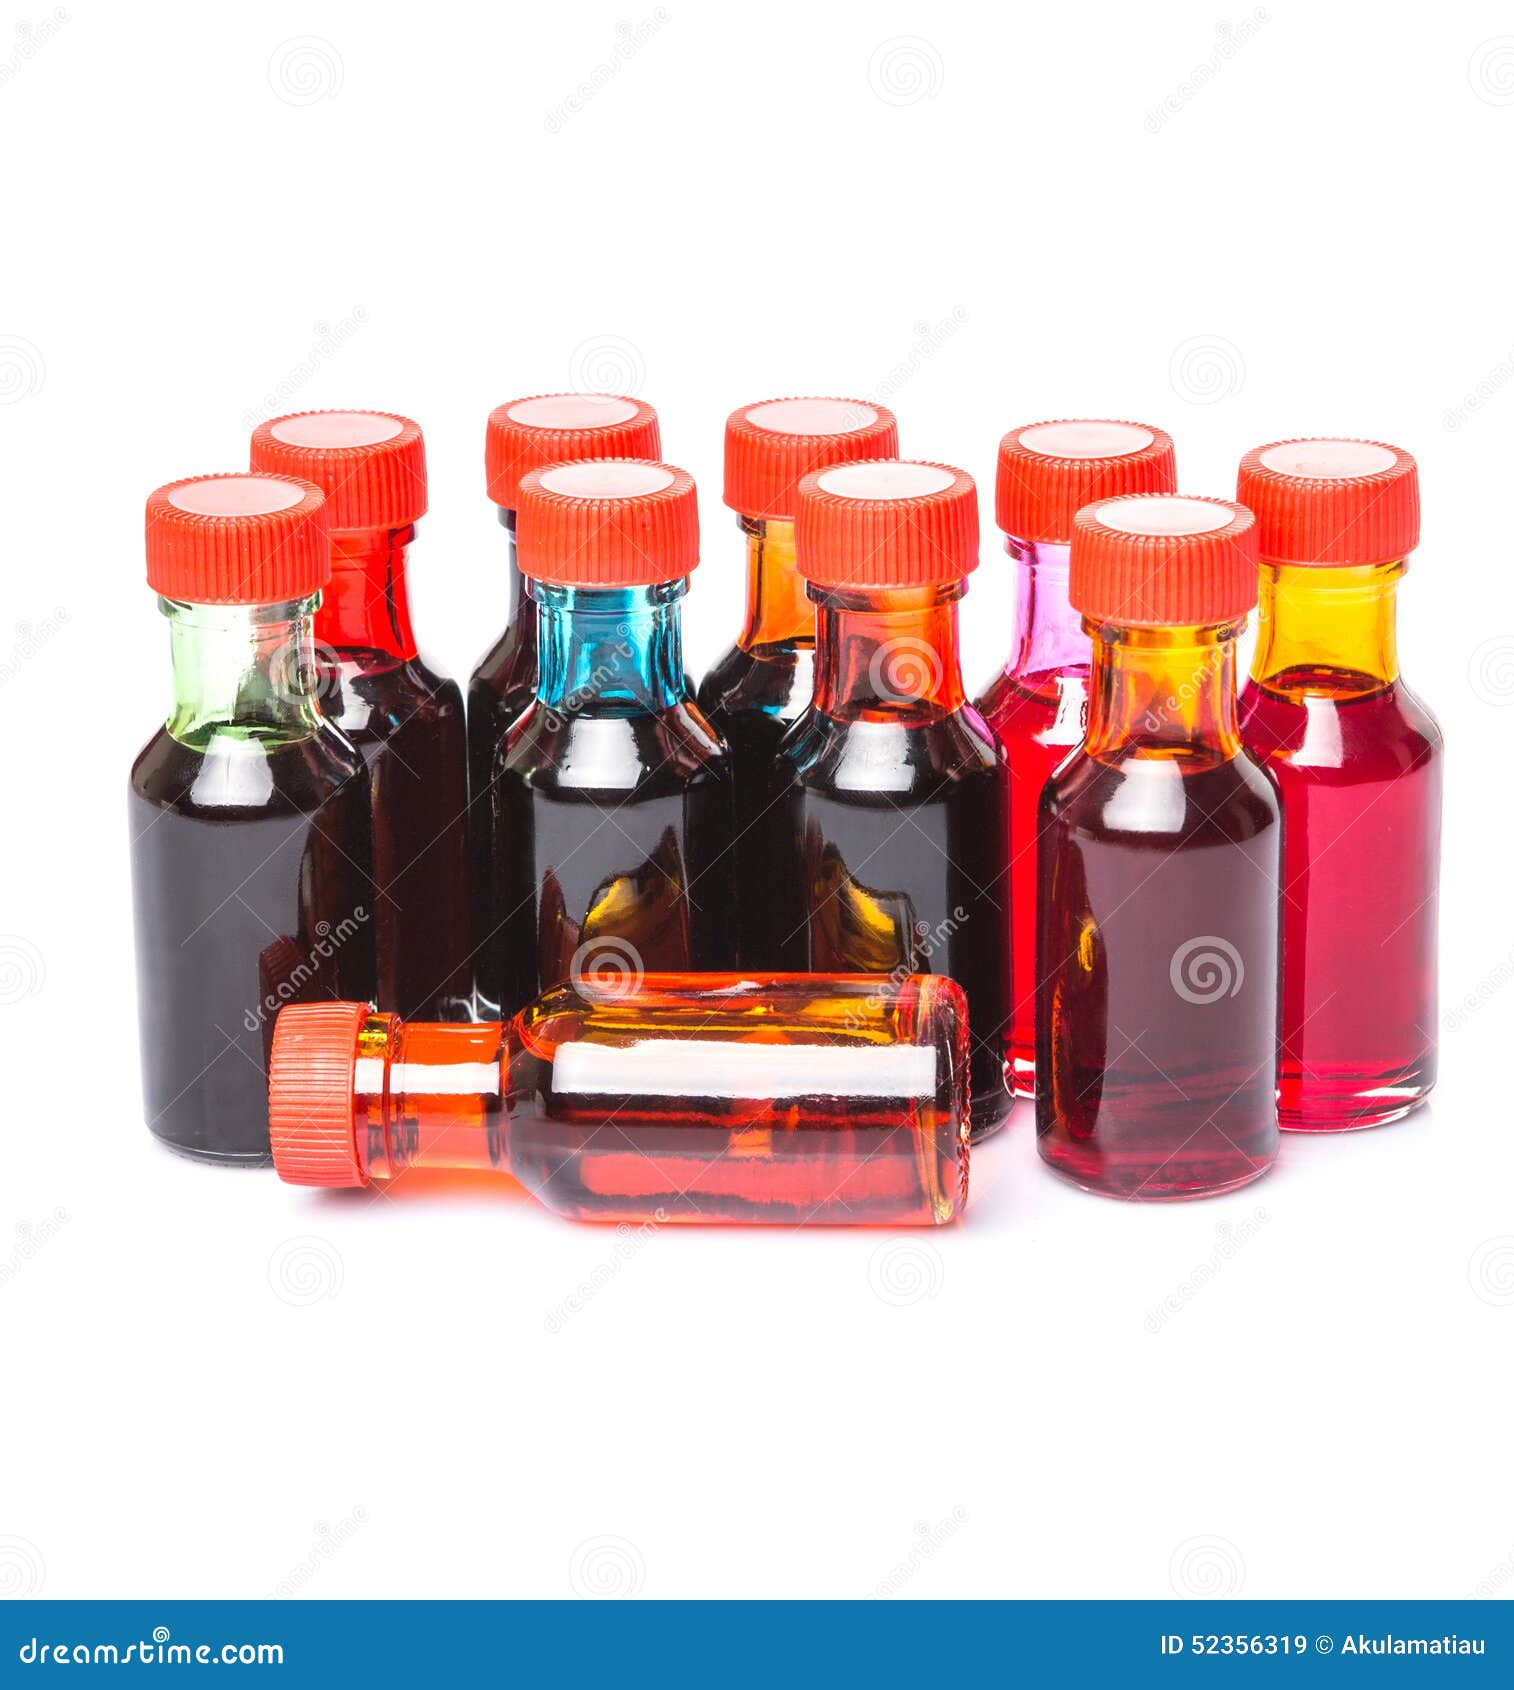 A Group of Food Color Additives I Stock Image - Image of decorate, orange:  52356319